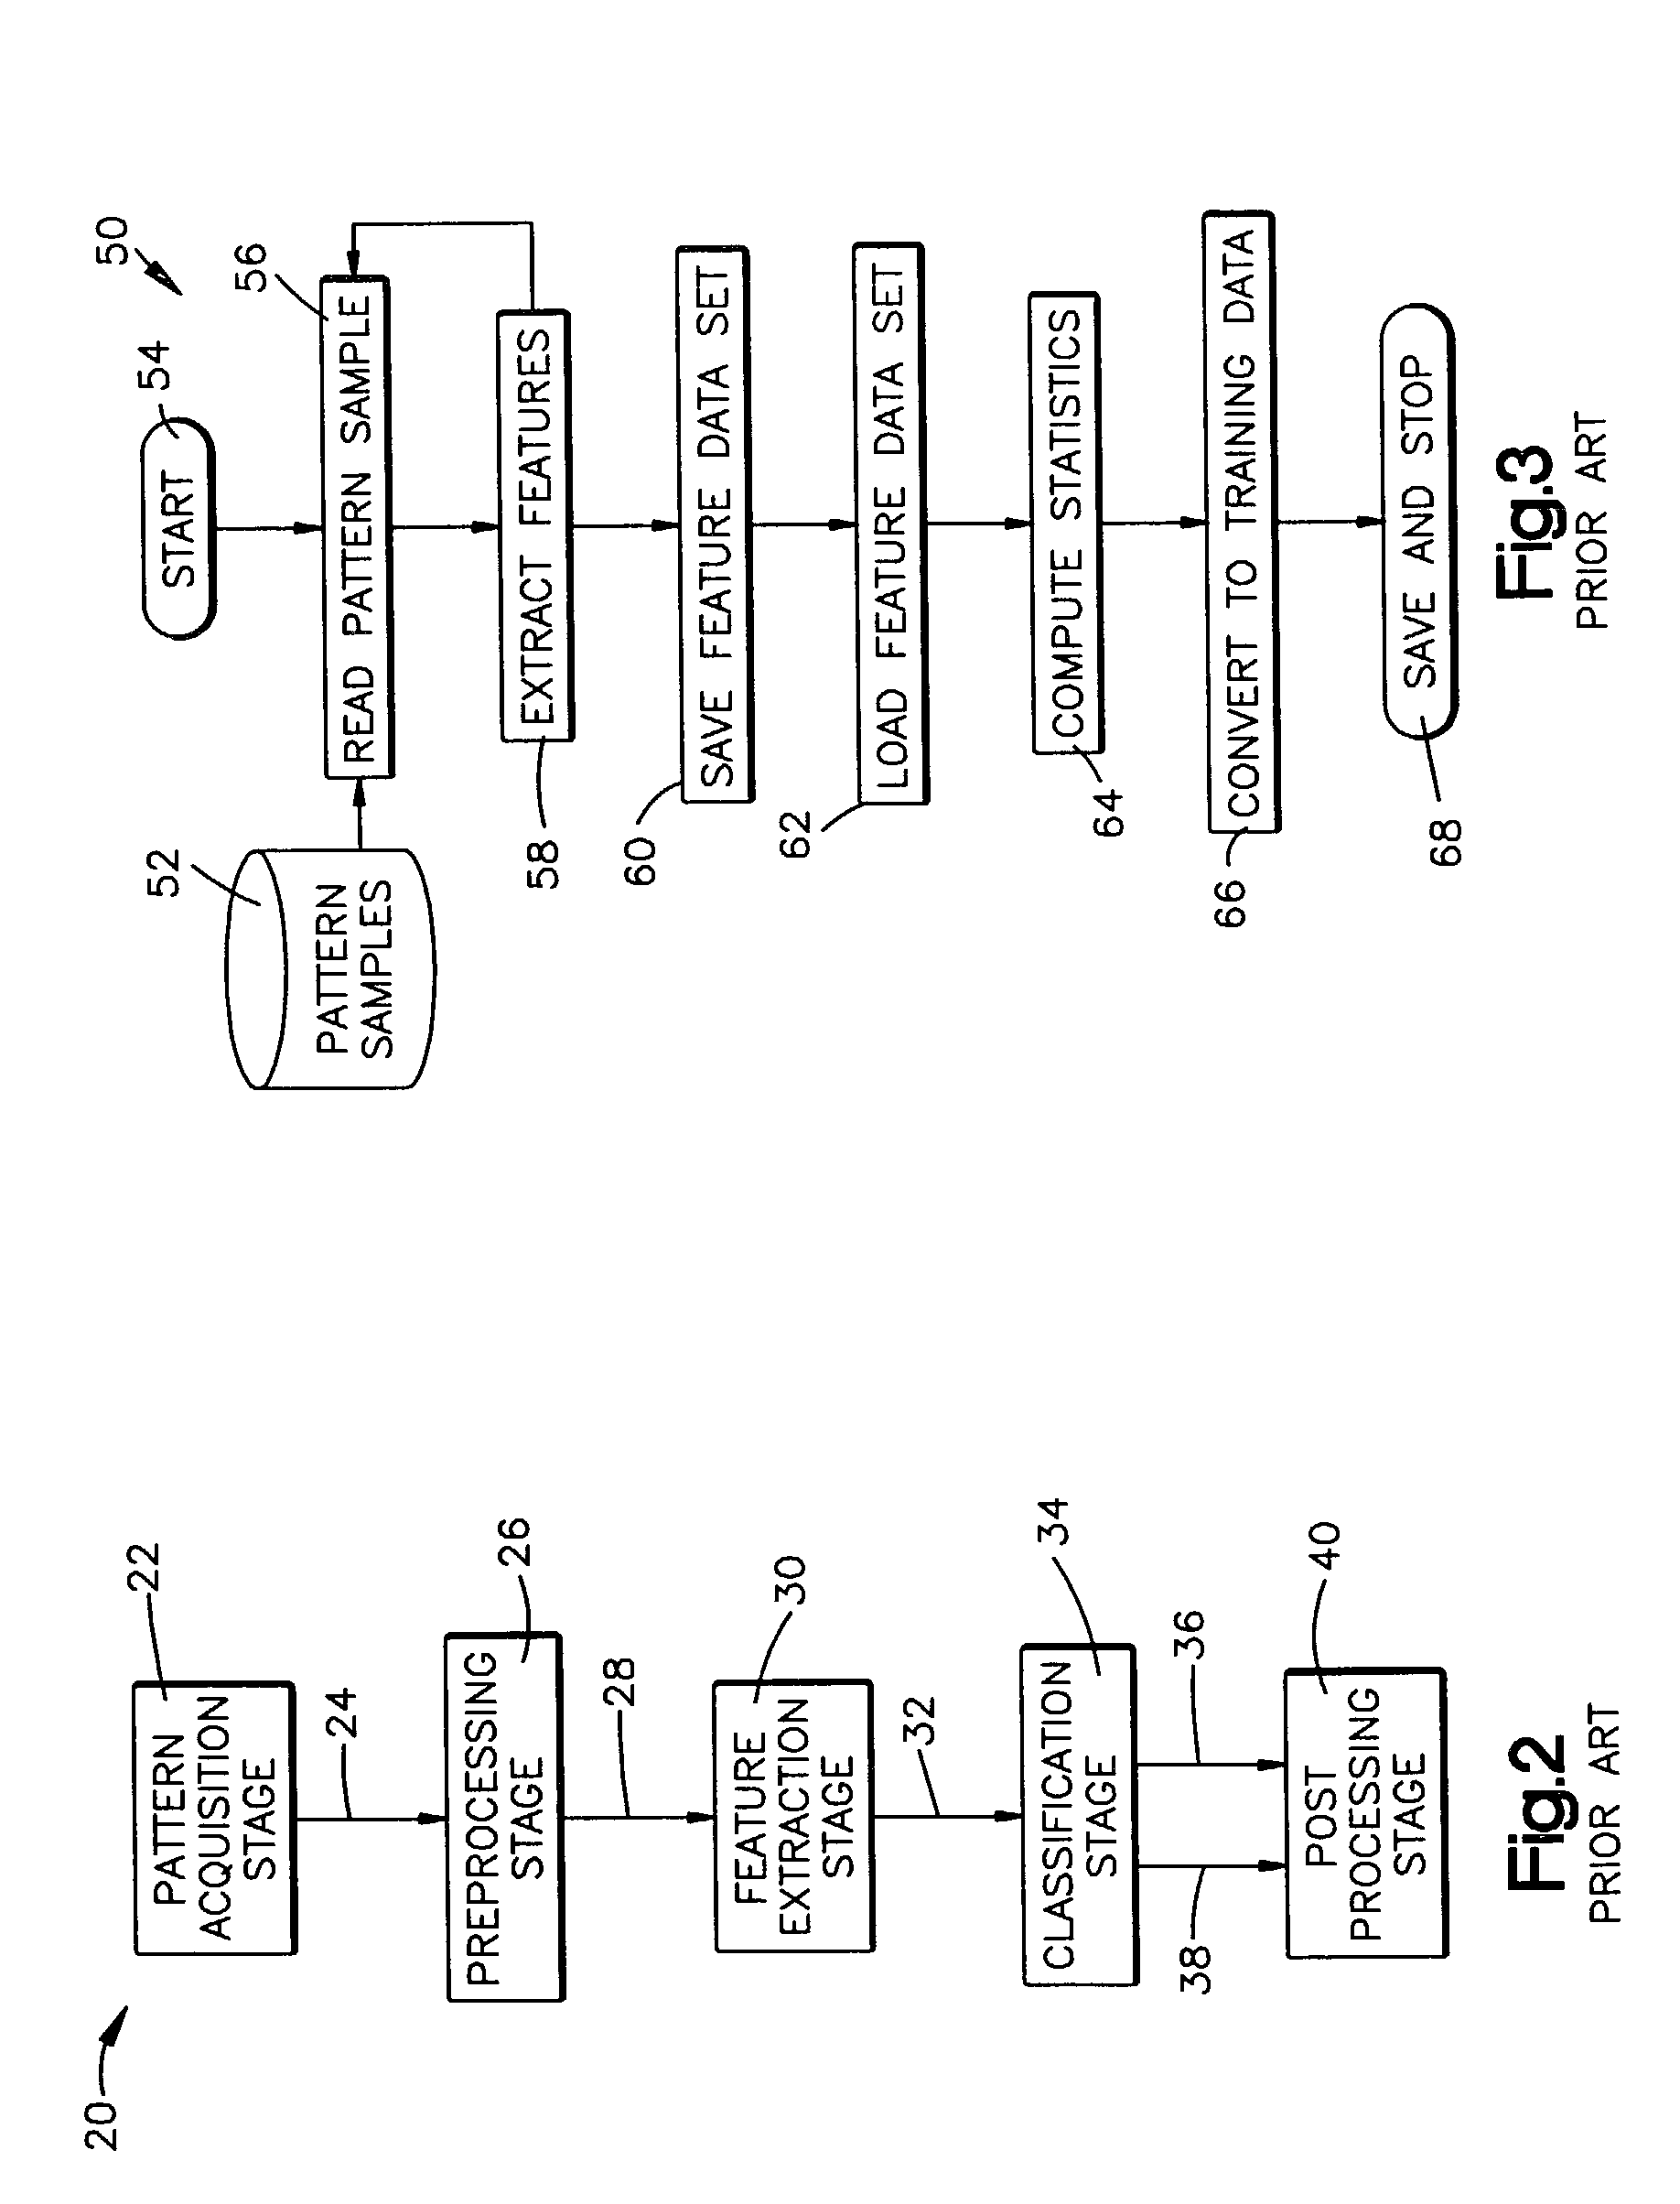 Method and computer program product for identifying output classes with multi-modal dispersion in feature space and incorporating multi-modal structure into a pattern recognition system